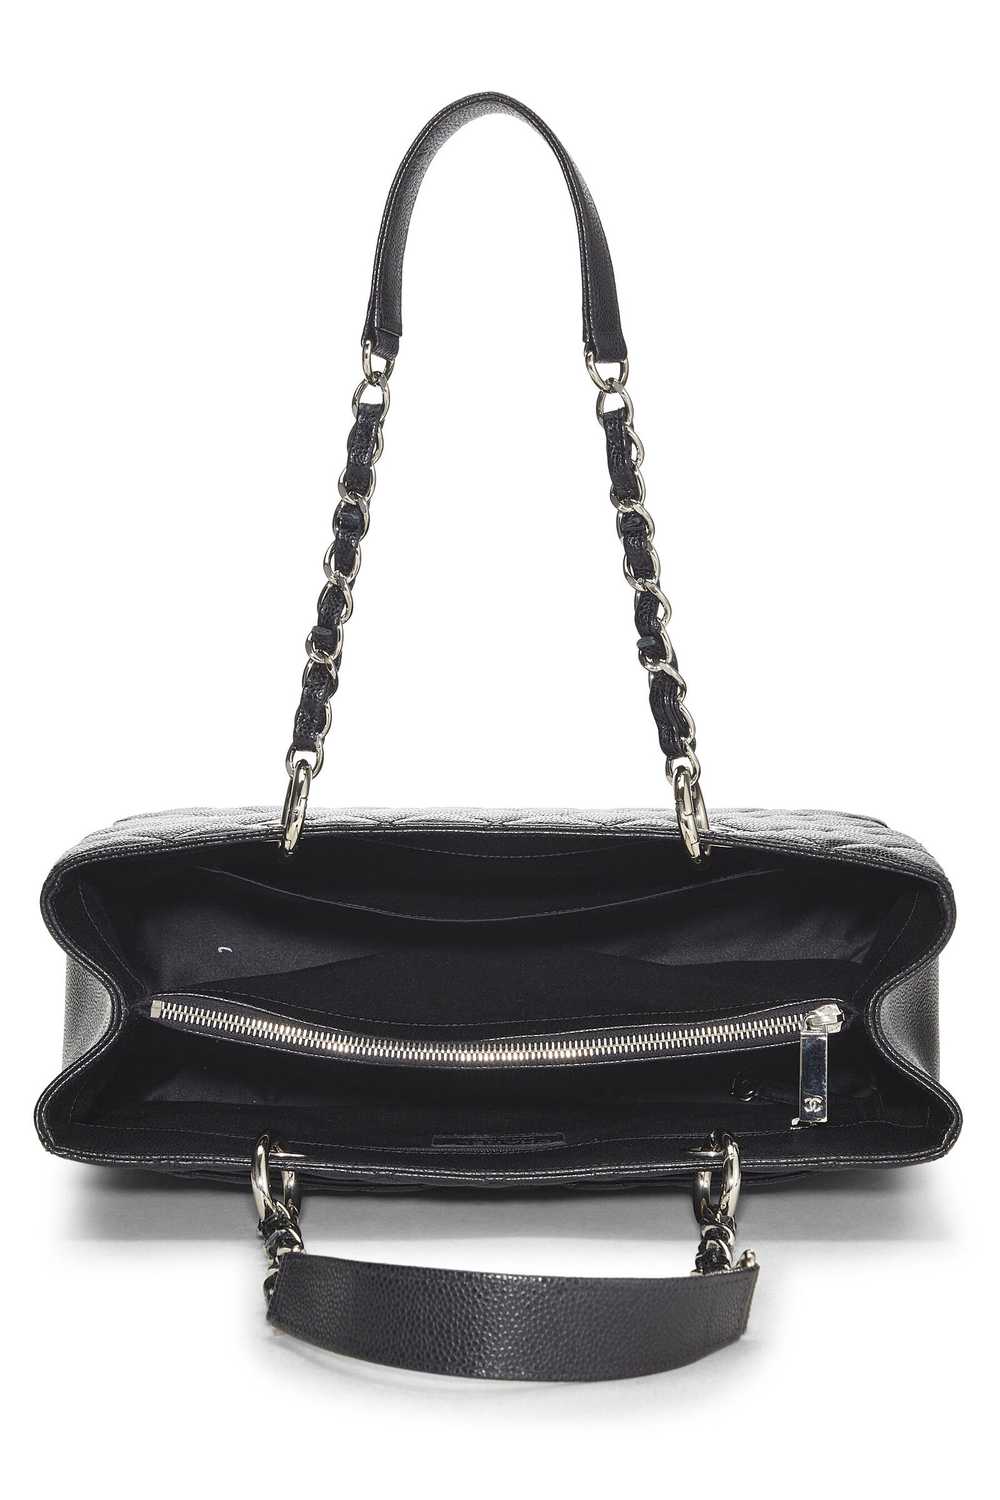 Black Quilted Caviar Grand Shopping Tote (GST) - image 6